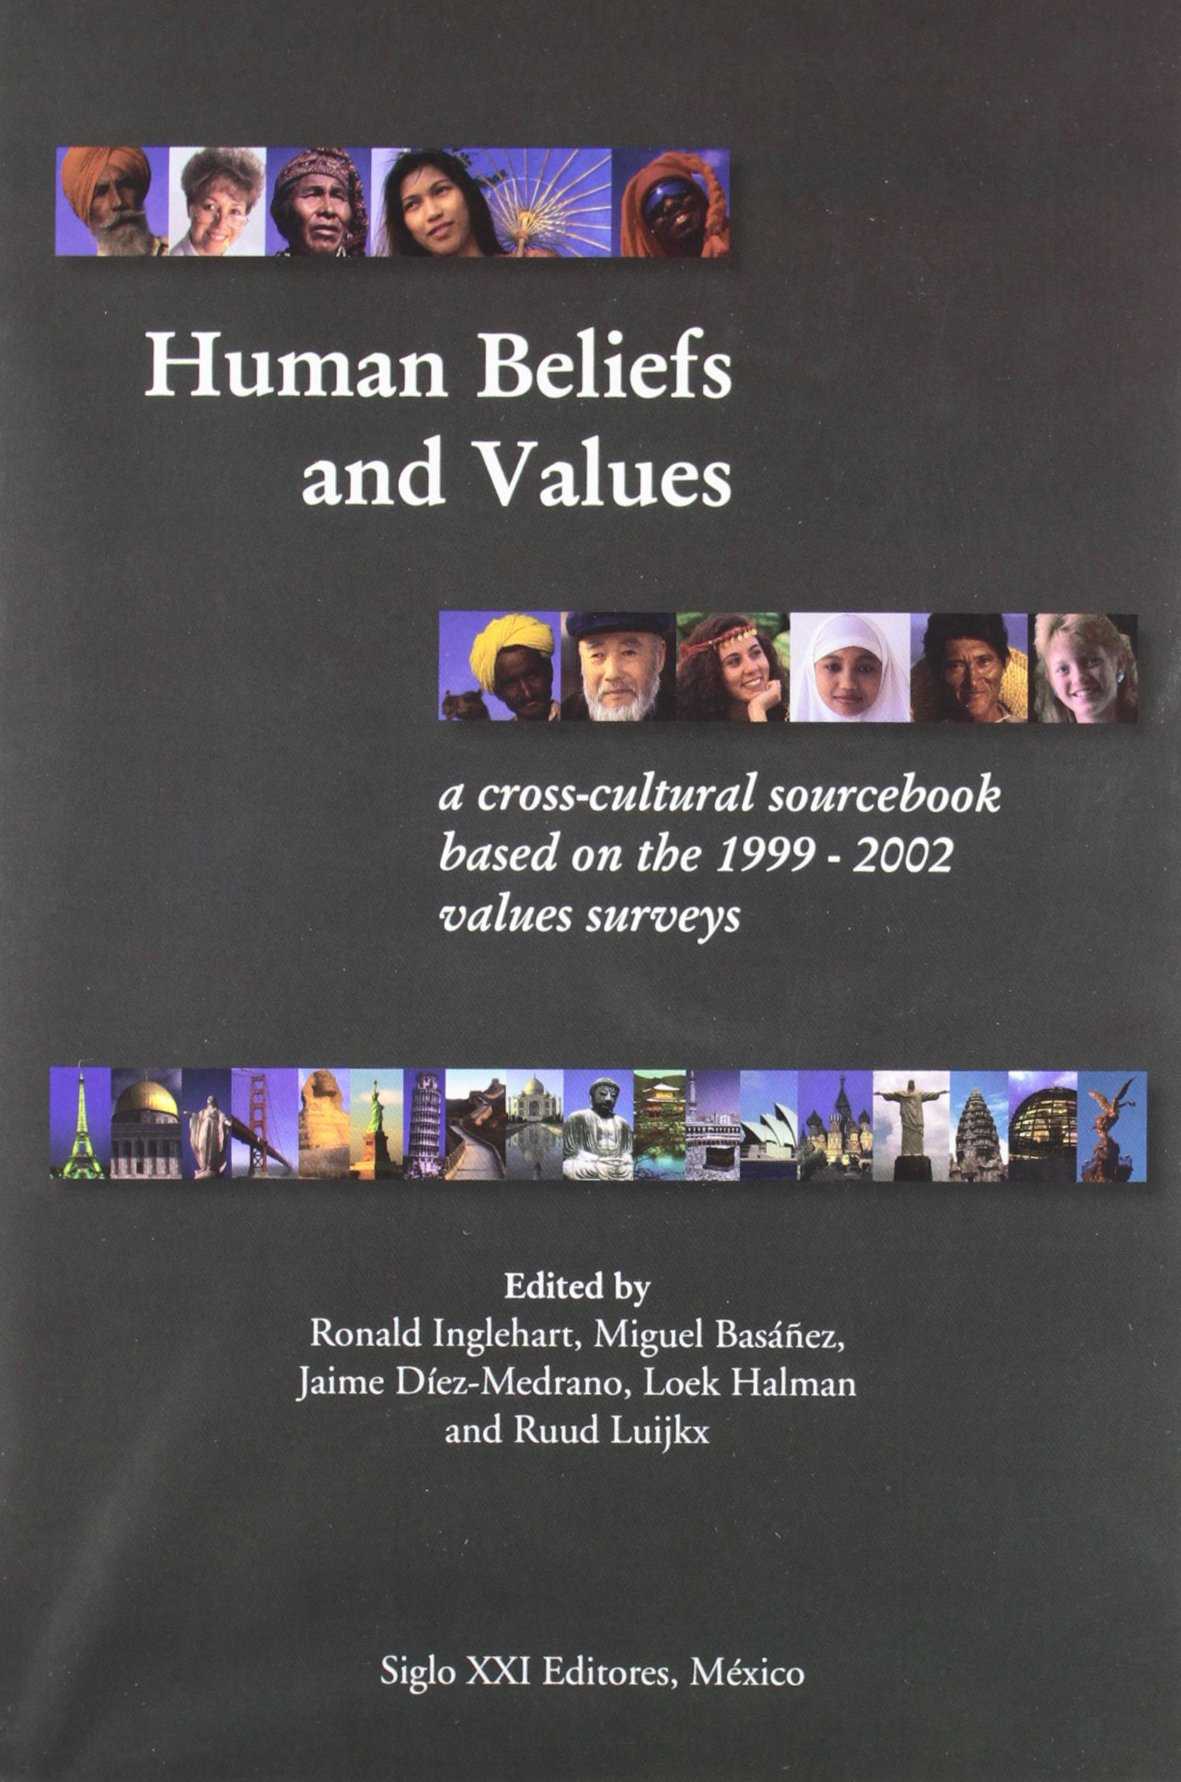 Human beliefs and values. 9789682325021